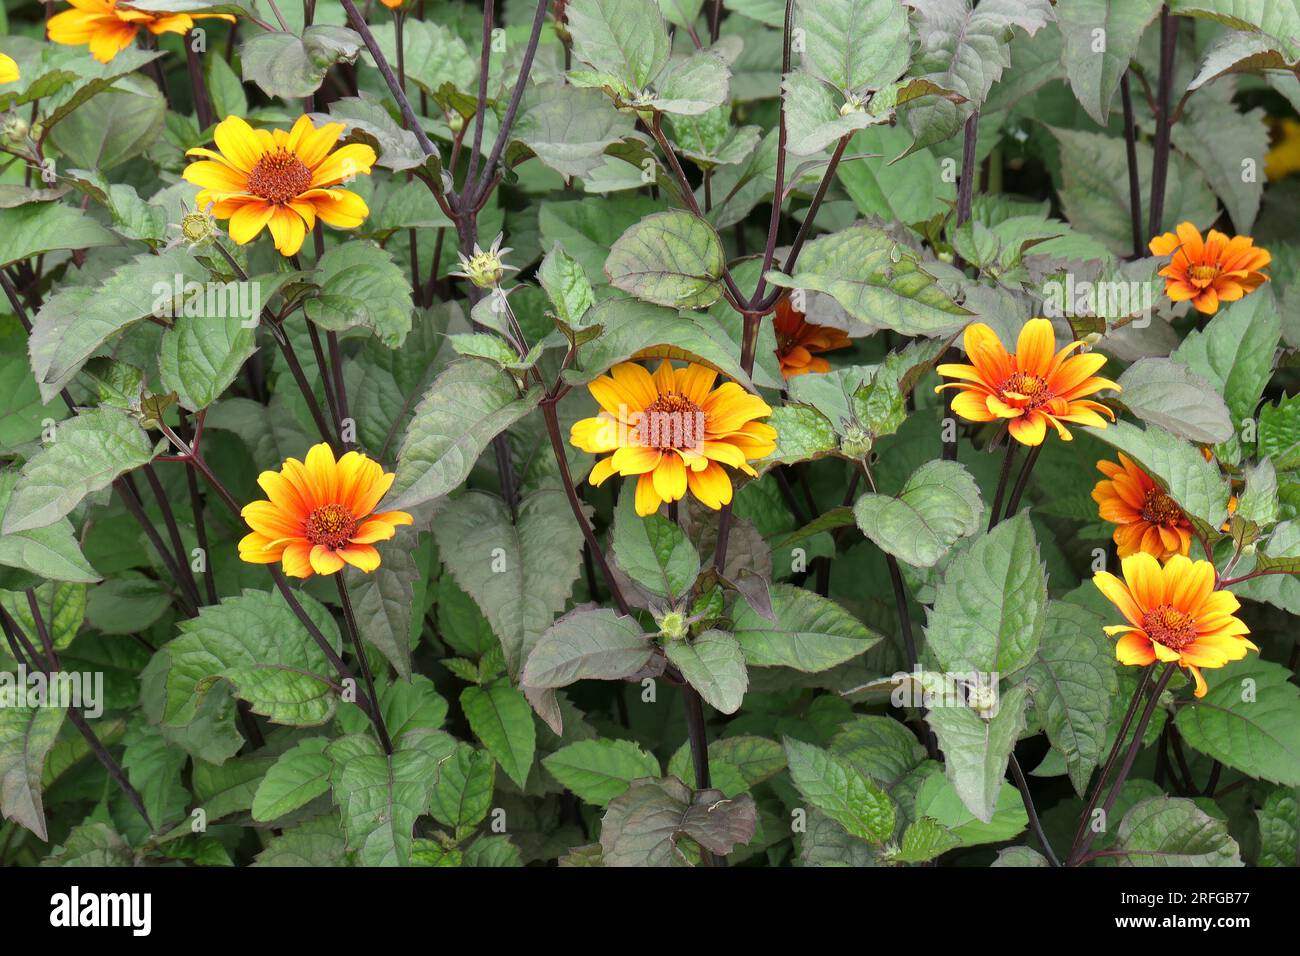 Closeup of the yellow summer flowering herbaceous perennial garden plant heliopsis helianthoides var. scabra bleeding hearts or North American Ox Eye. Stock Photo